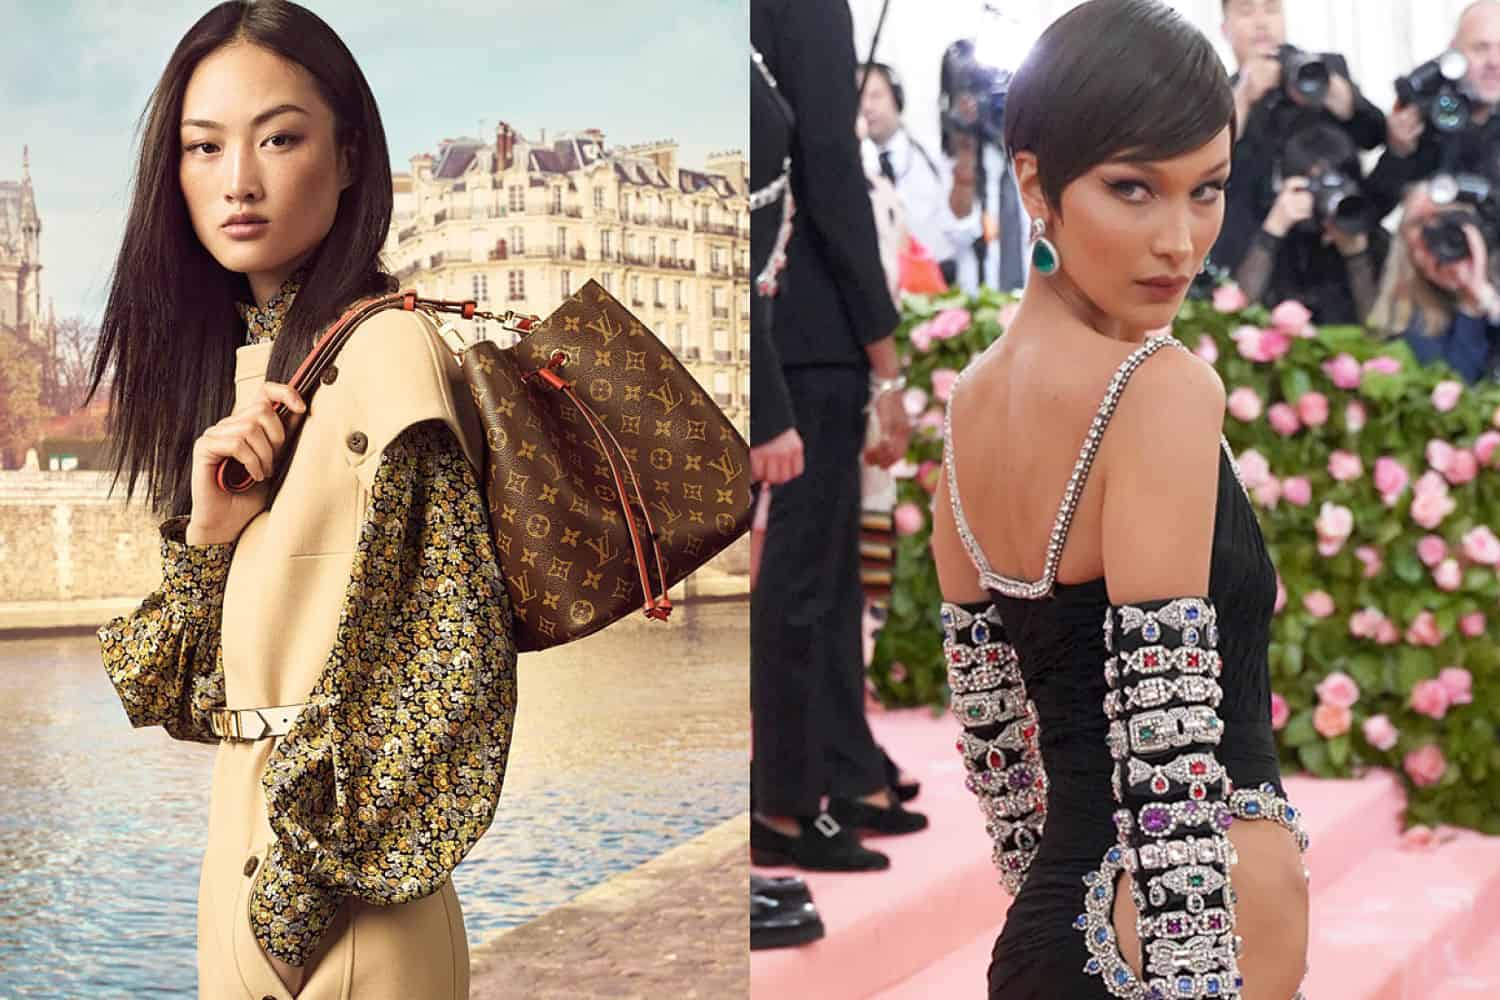 The Most Talked About New Louis Vuitton Bag Just Got a Makeover